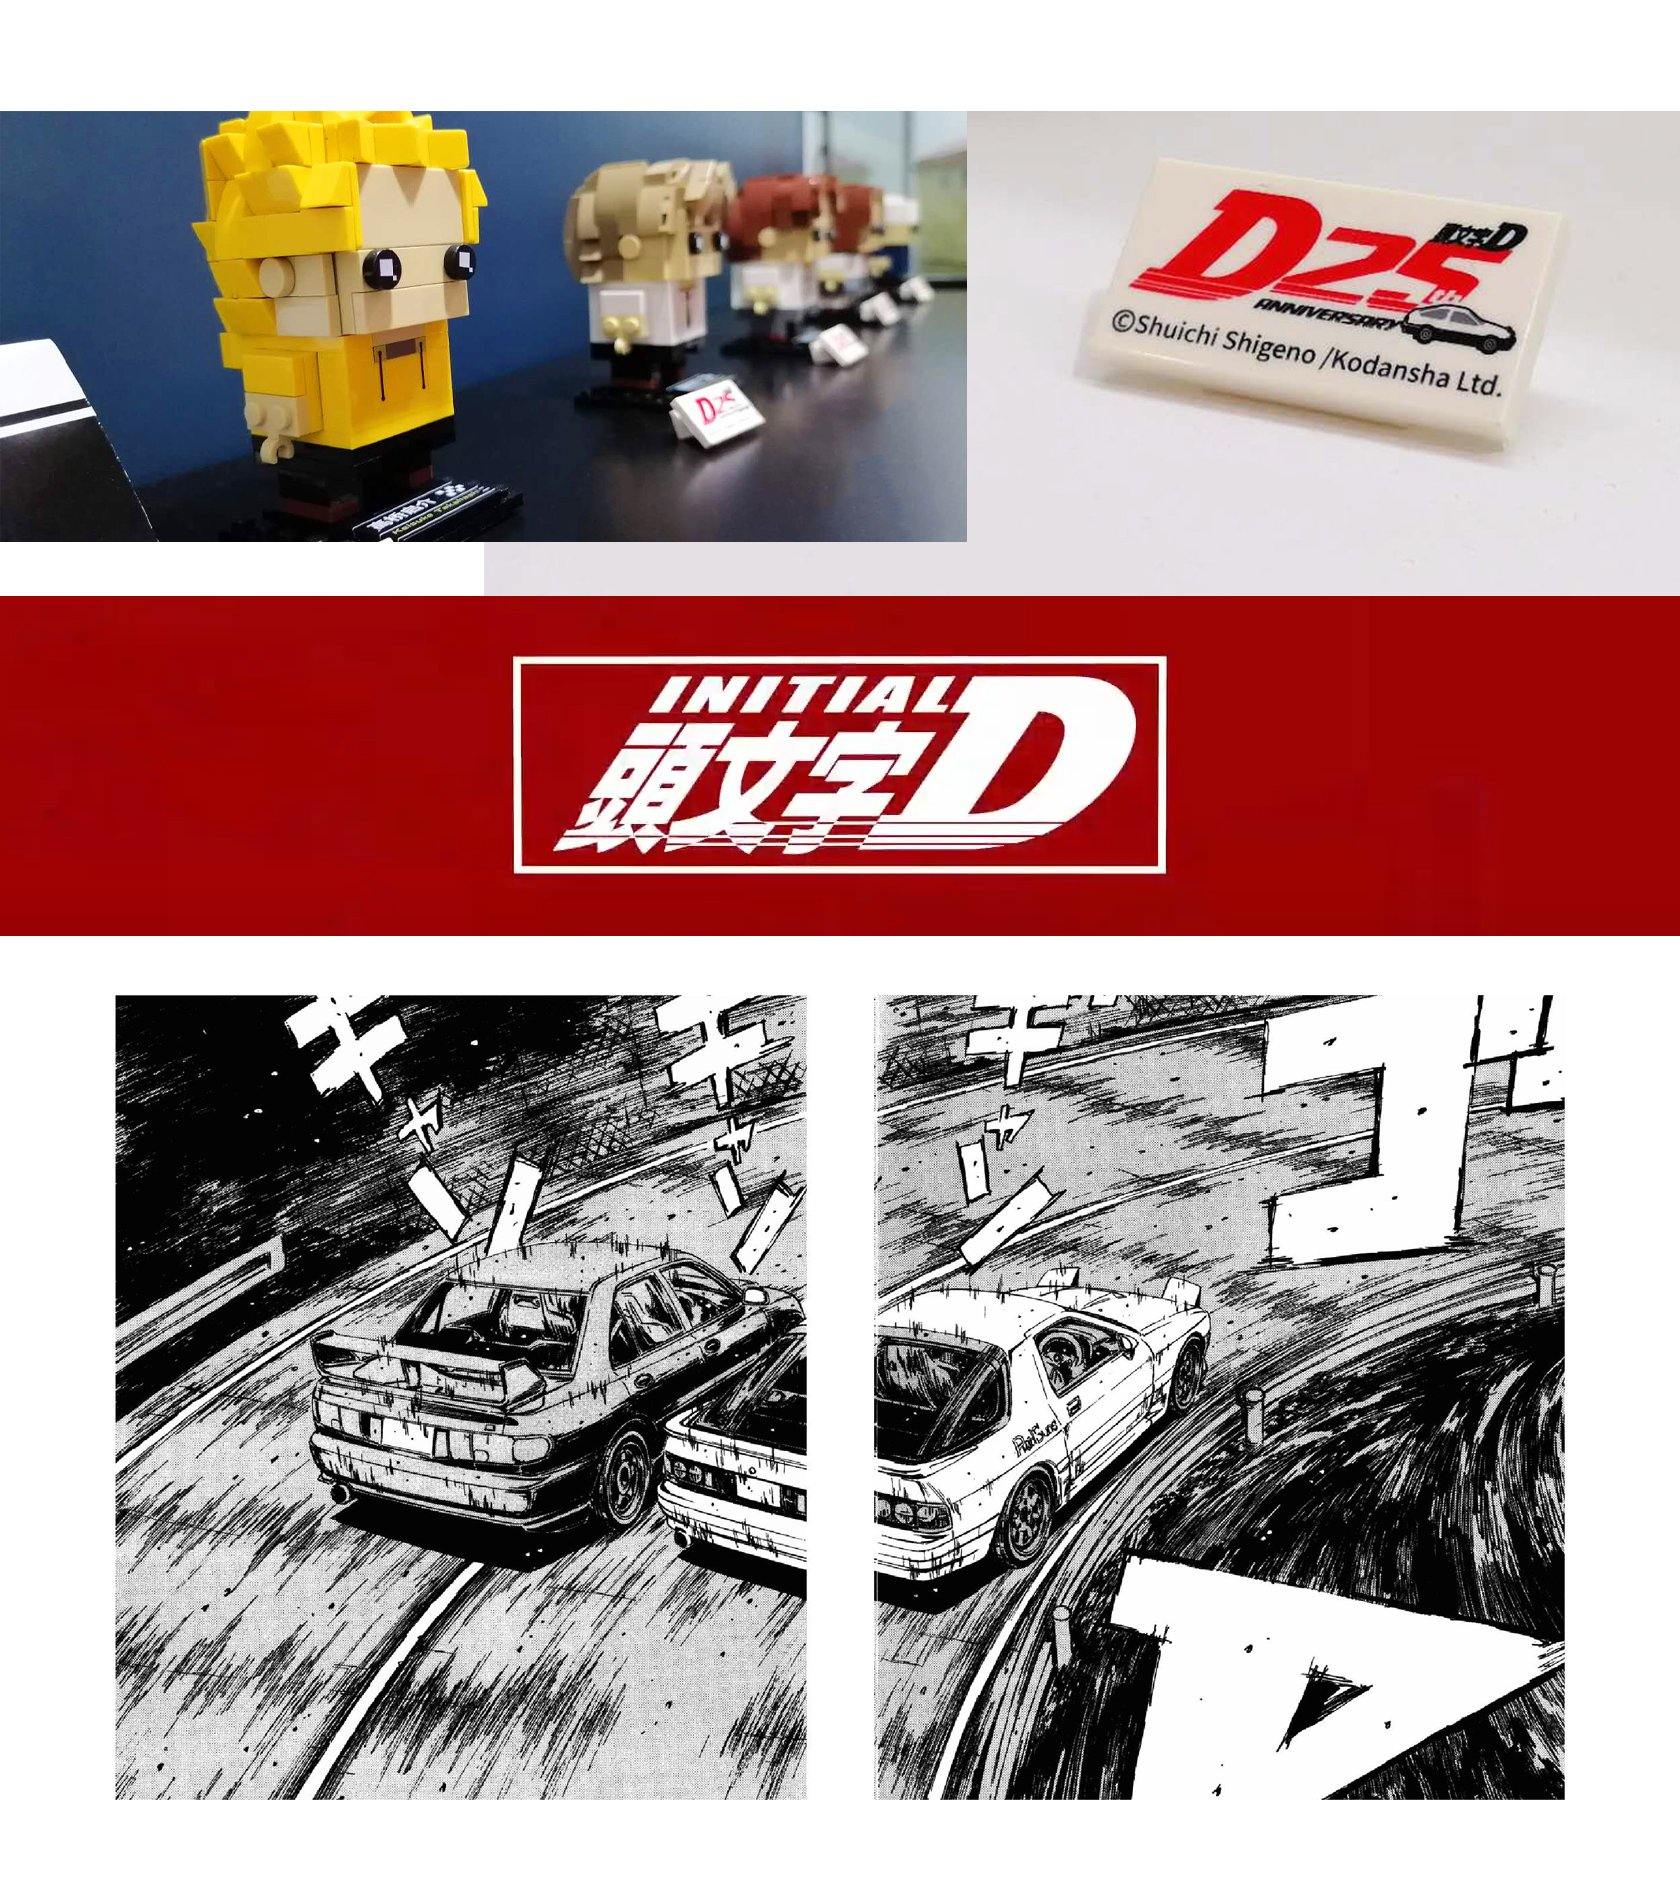 Celebrating Initial D 's 25th Anniversary